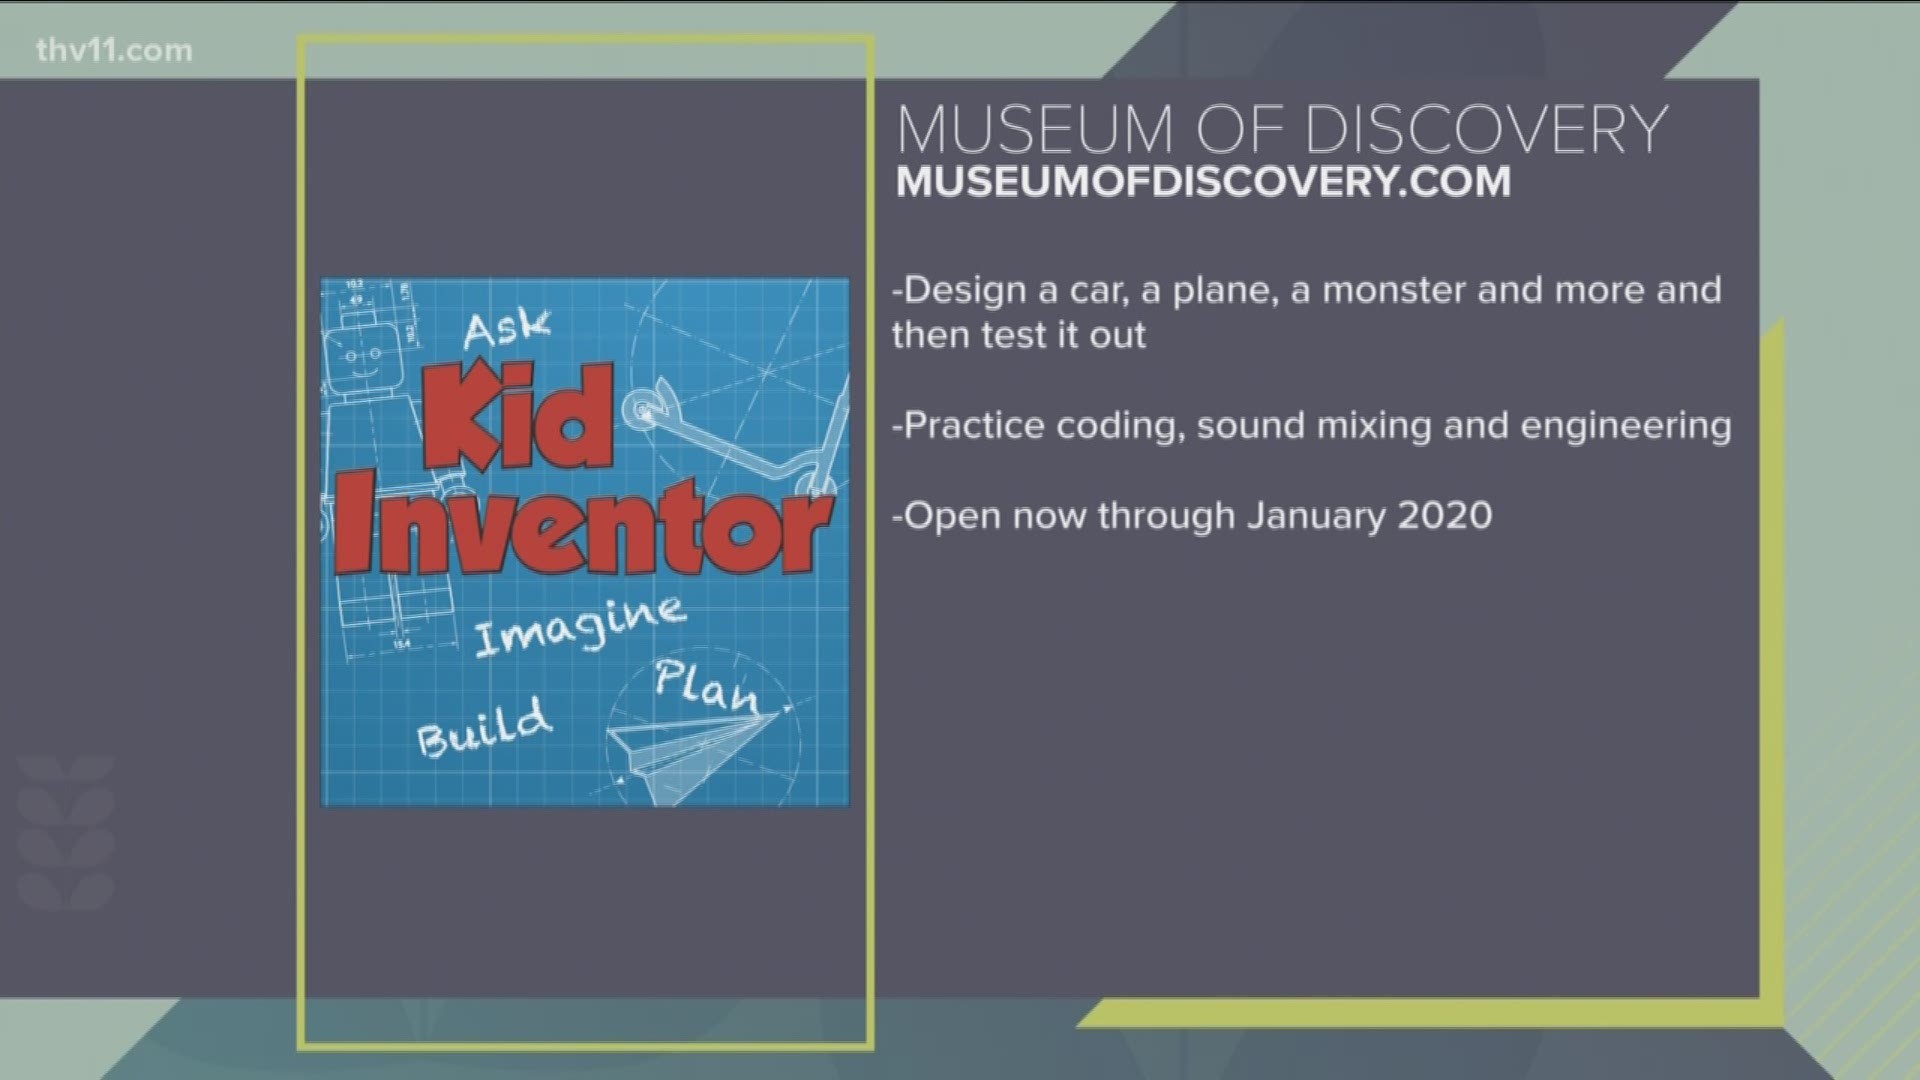 There's a new interactive exhibit helping children become a ' Kid Inventor' at the Museum of Discovery.